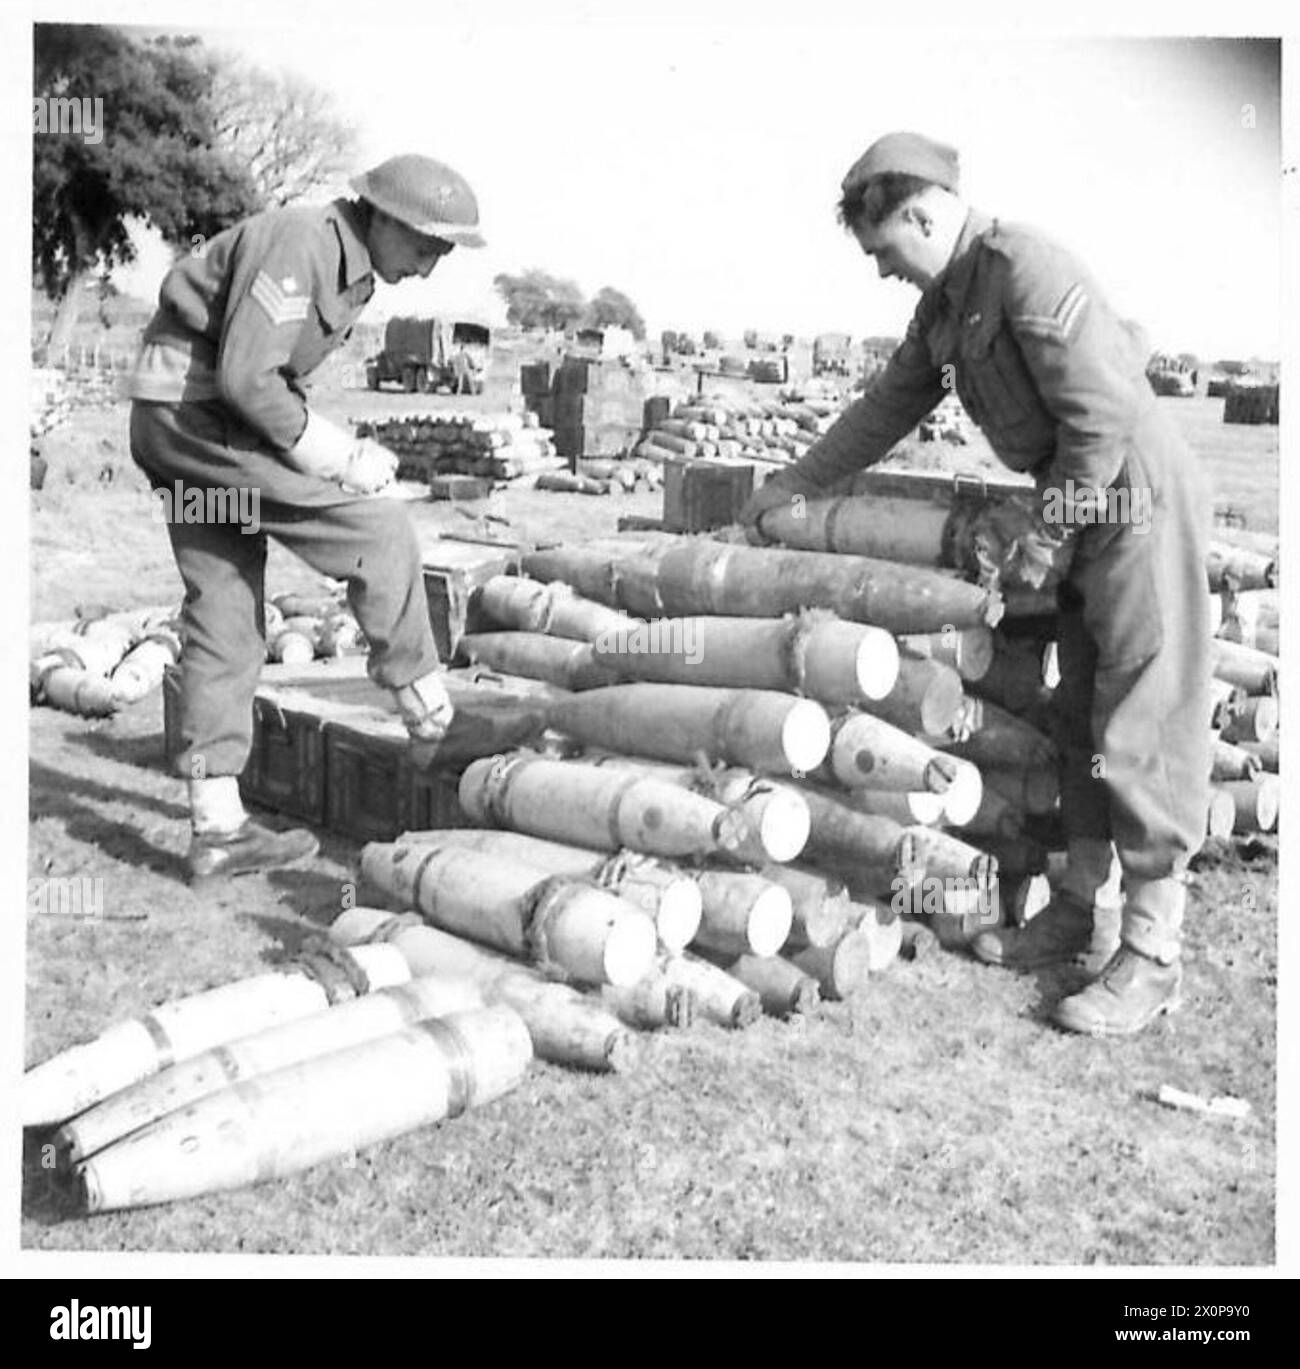 ITALY : FIFTH ARMYSUPPLIES FOR ANZIO BRIDGEHEAD - Checking shells at an ammo dump; left to right - S/Sgt. J. Elrick of 8 Union Street. Stirling Cpl. J. Muir of 72 Avon Bank Road, Rutherglen, Glasgow Photographic negative , British Army Stock Photo